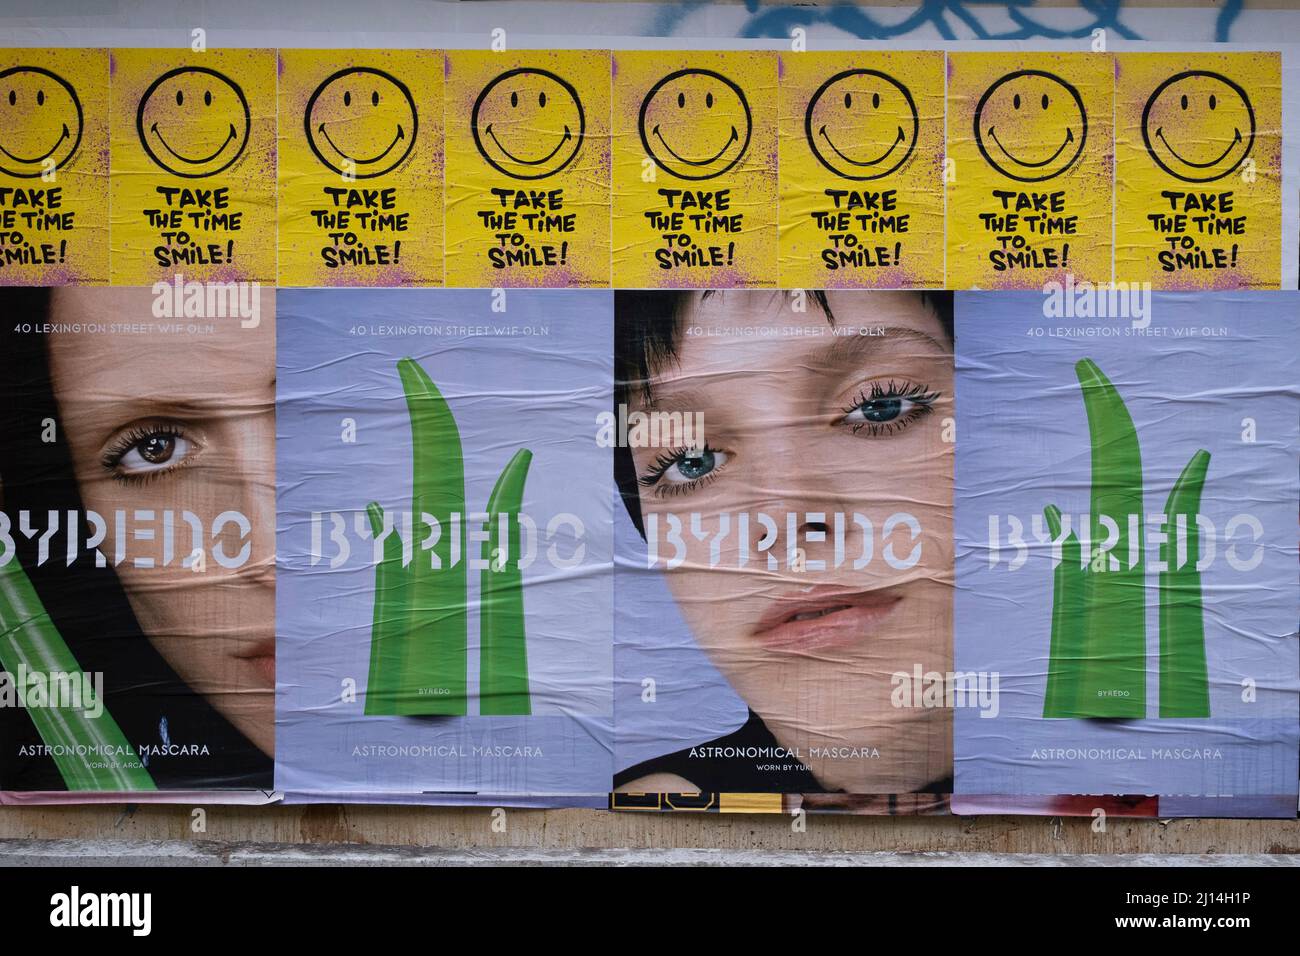 Take time to smile, smiley face posters above fashion make up company advertising posters on Berwick Street on 3rd March 2022 in London, United Kingdom. A smiley, sometimes called a happy face or smiley face, is a stylised representation of a smiling humanoid face that is a part of popular culture worldwide. The classic form designed by Harvey Ball in 1963 comprises a yellow circle with two black dots representing eyes and a black arc representing the mouth. Stock Photo